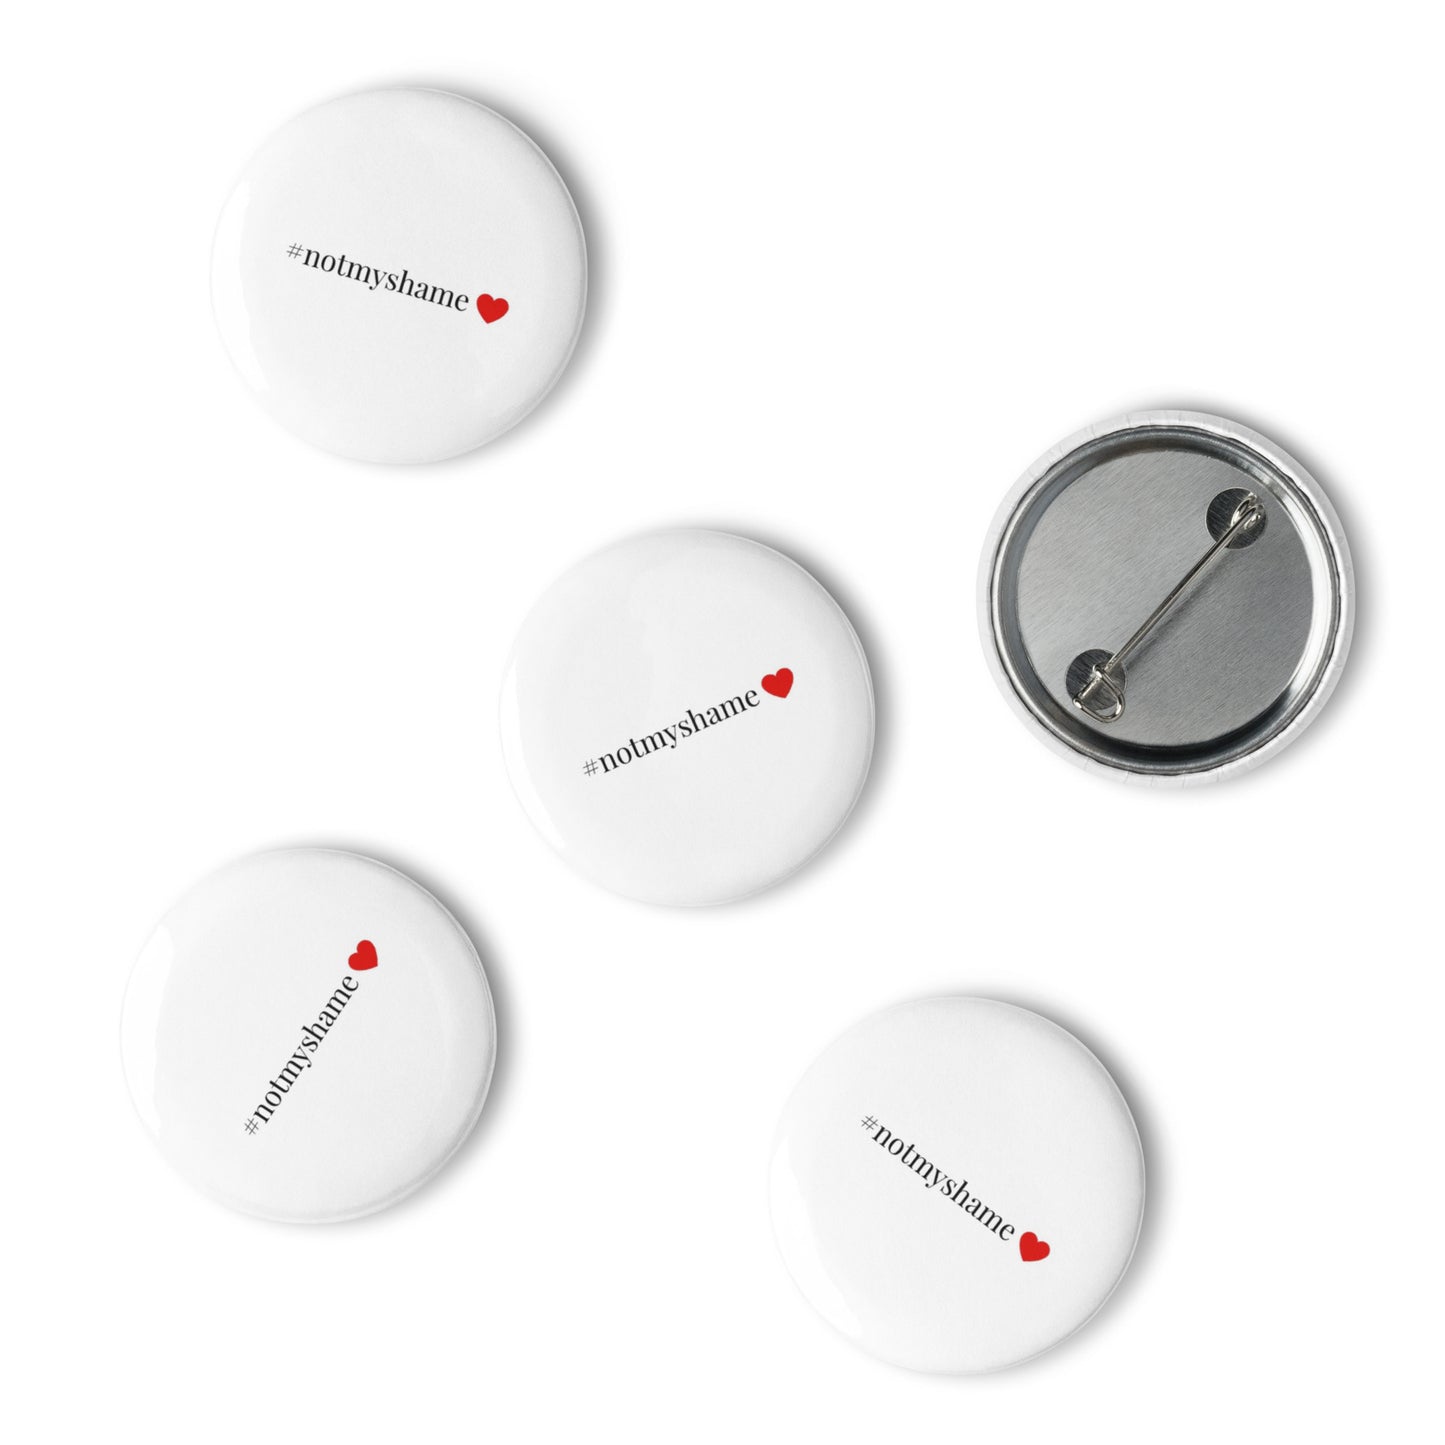 #NotMyShame pin buttons (5 in pack)